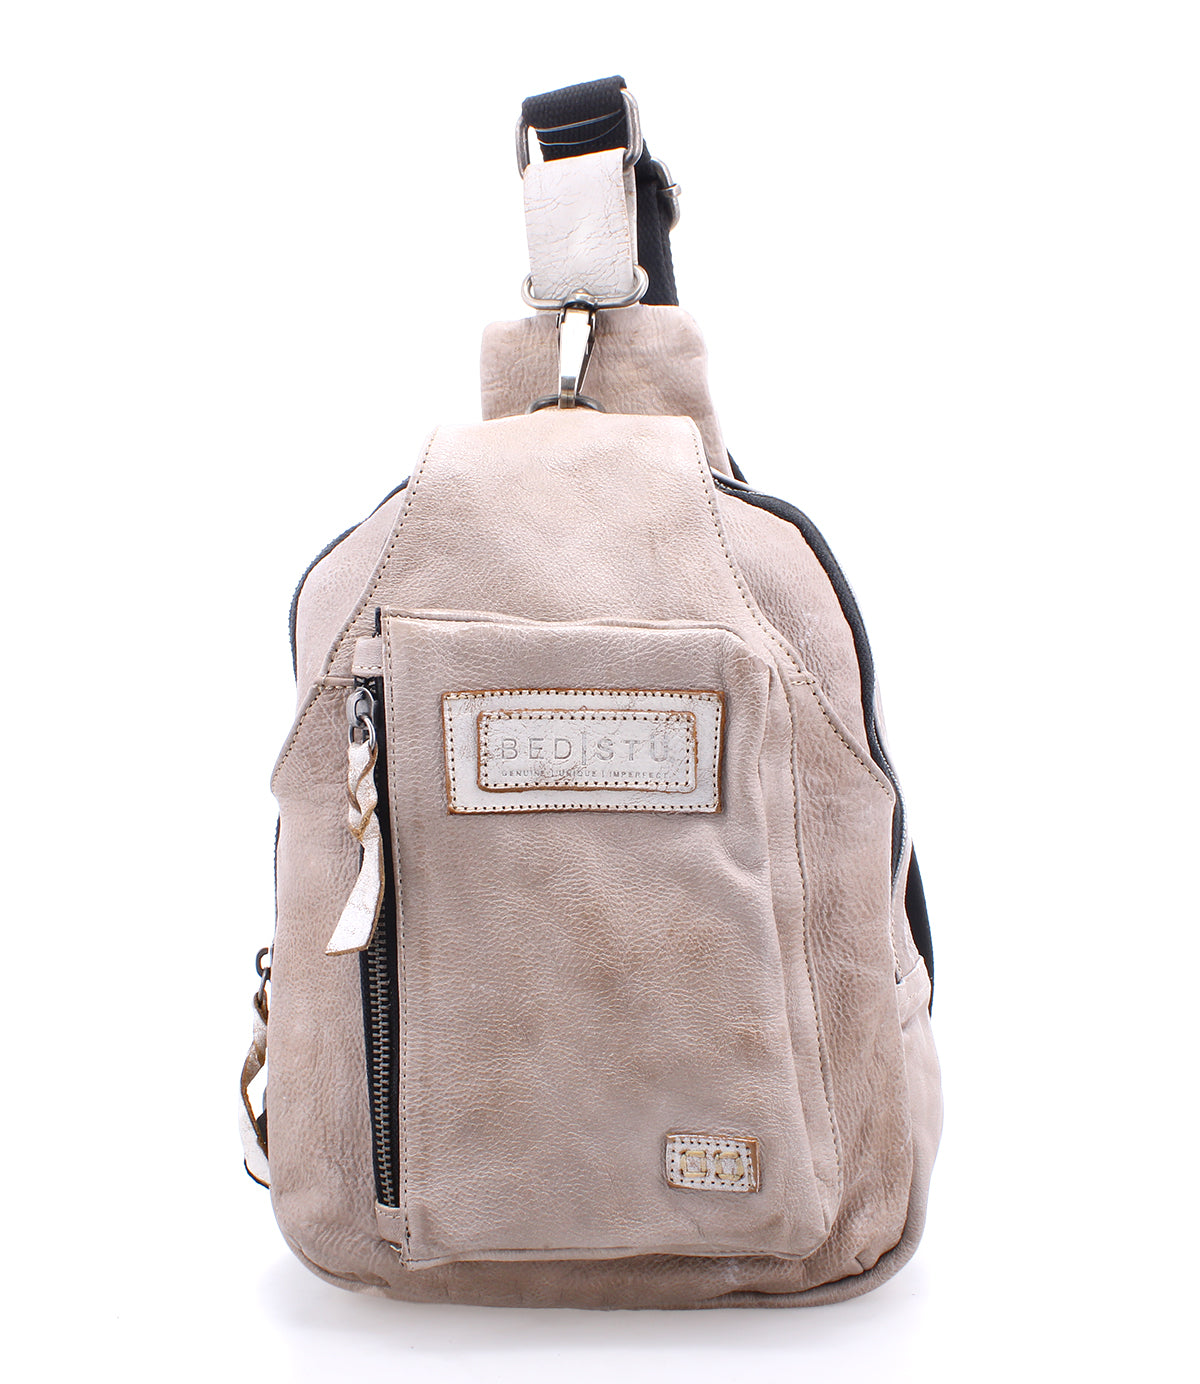 A Beau leather sling backpack with a zipper on the side, perfect for hands-free activities.